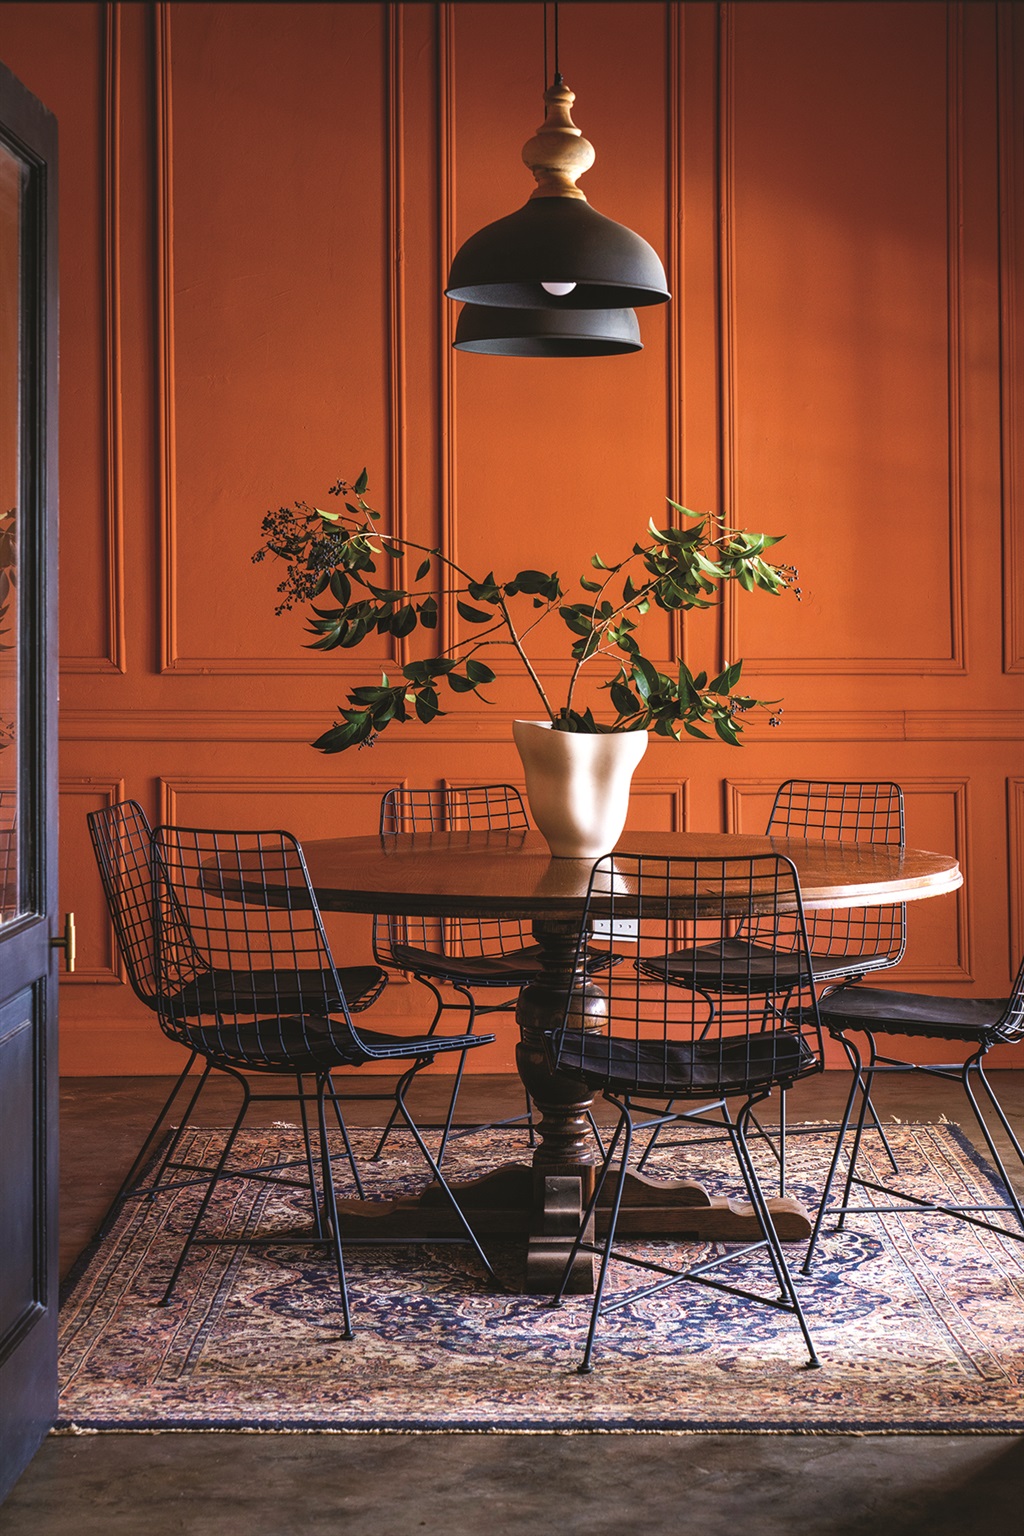 Most beautiful winners Ricardo and Chérie Liut's dining area used to be a bedroom. Photo: Christoph Hoffmann